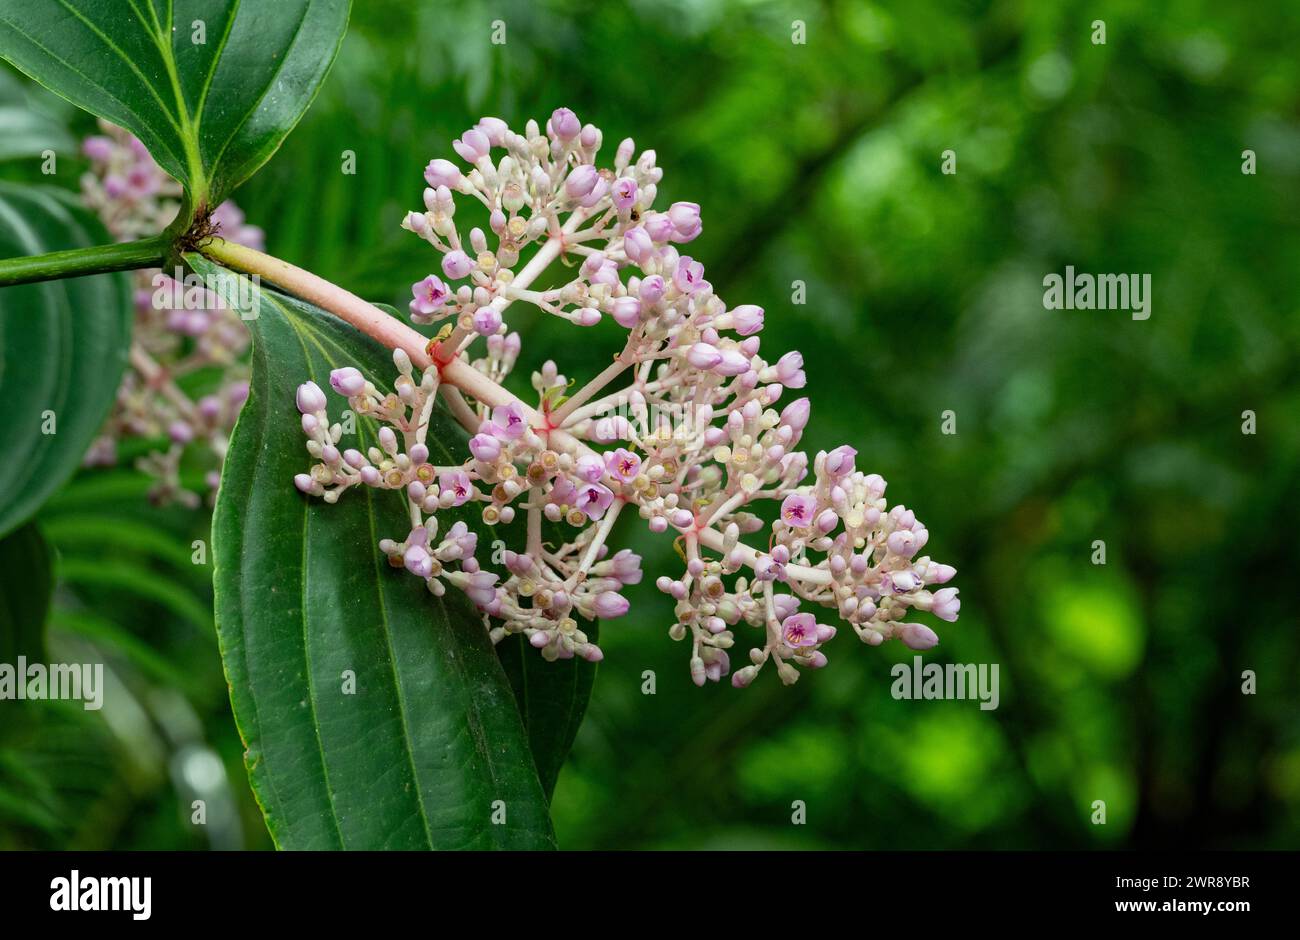 Beginning flowers and leaves of a Medinilla magnifica as a close-up Stock Photo